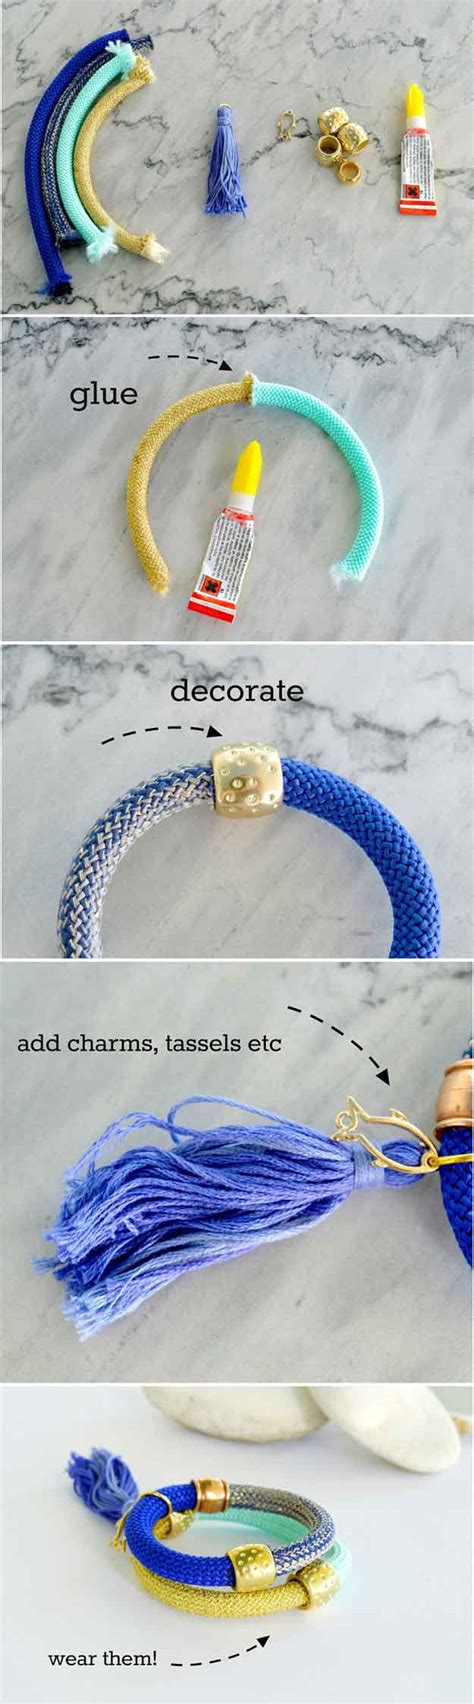 Cheap Jewelry Projects For Girls Diy Projects Craft Ideas And How Tos